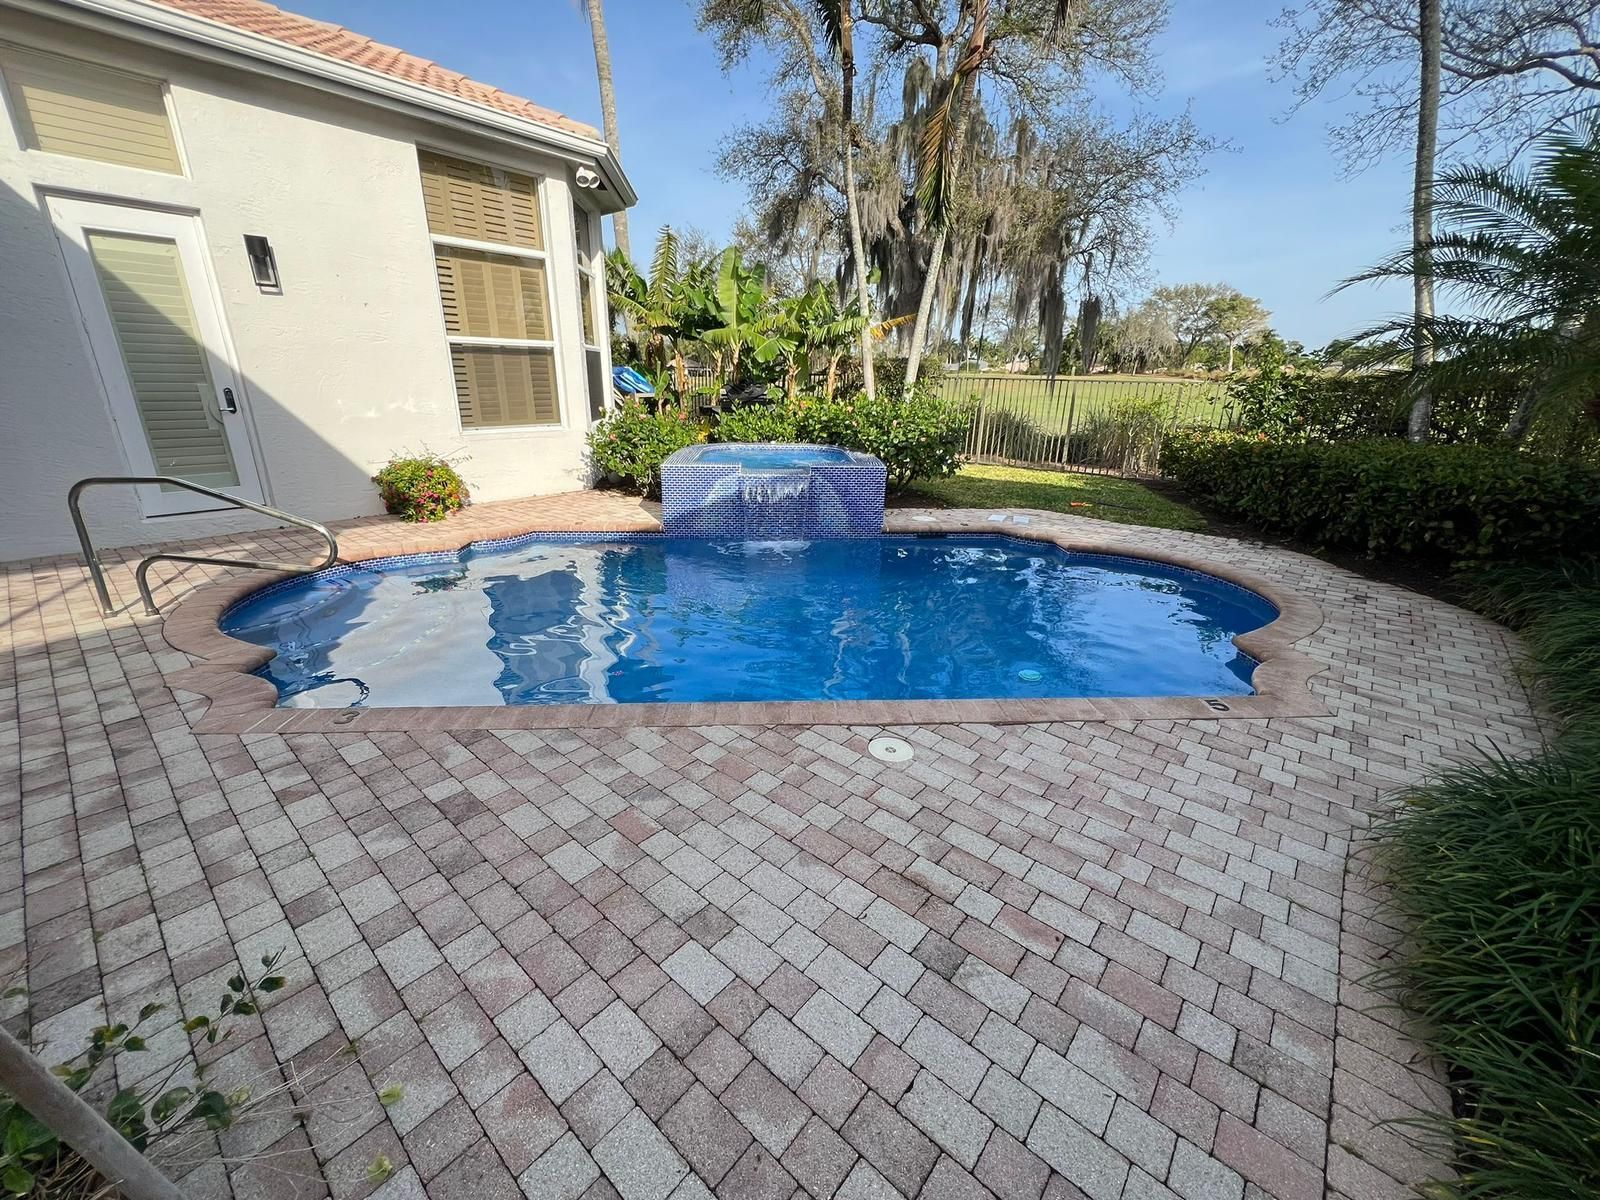 A large swimming pool is sitting on a brick patio in front of a house